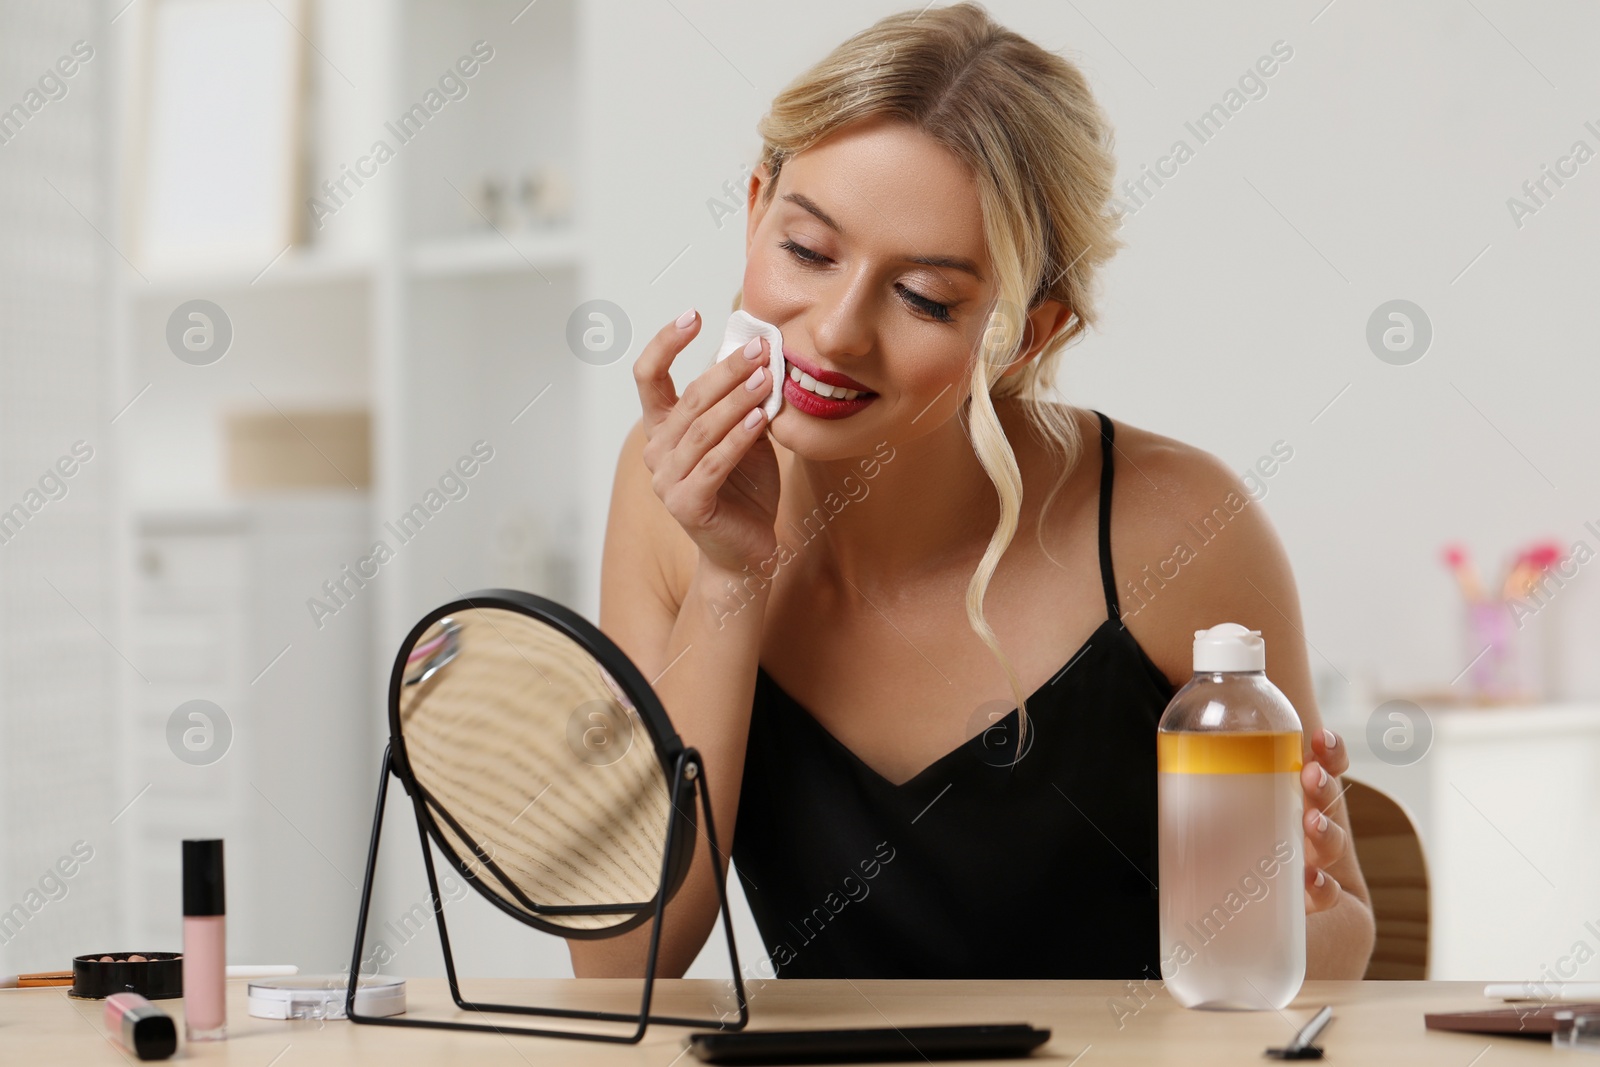 Photo of Smiling woman removing makeup with cotton pad in front of mirror at table indoors